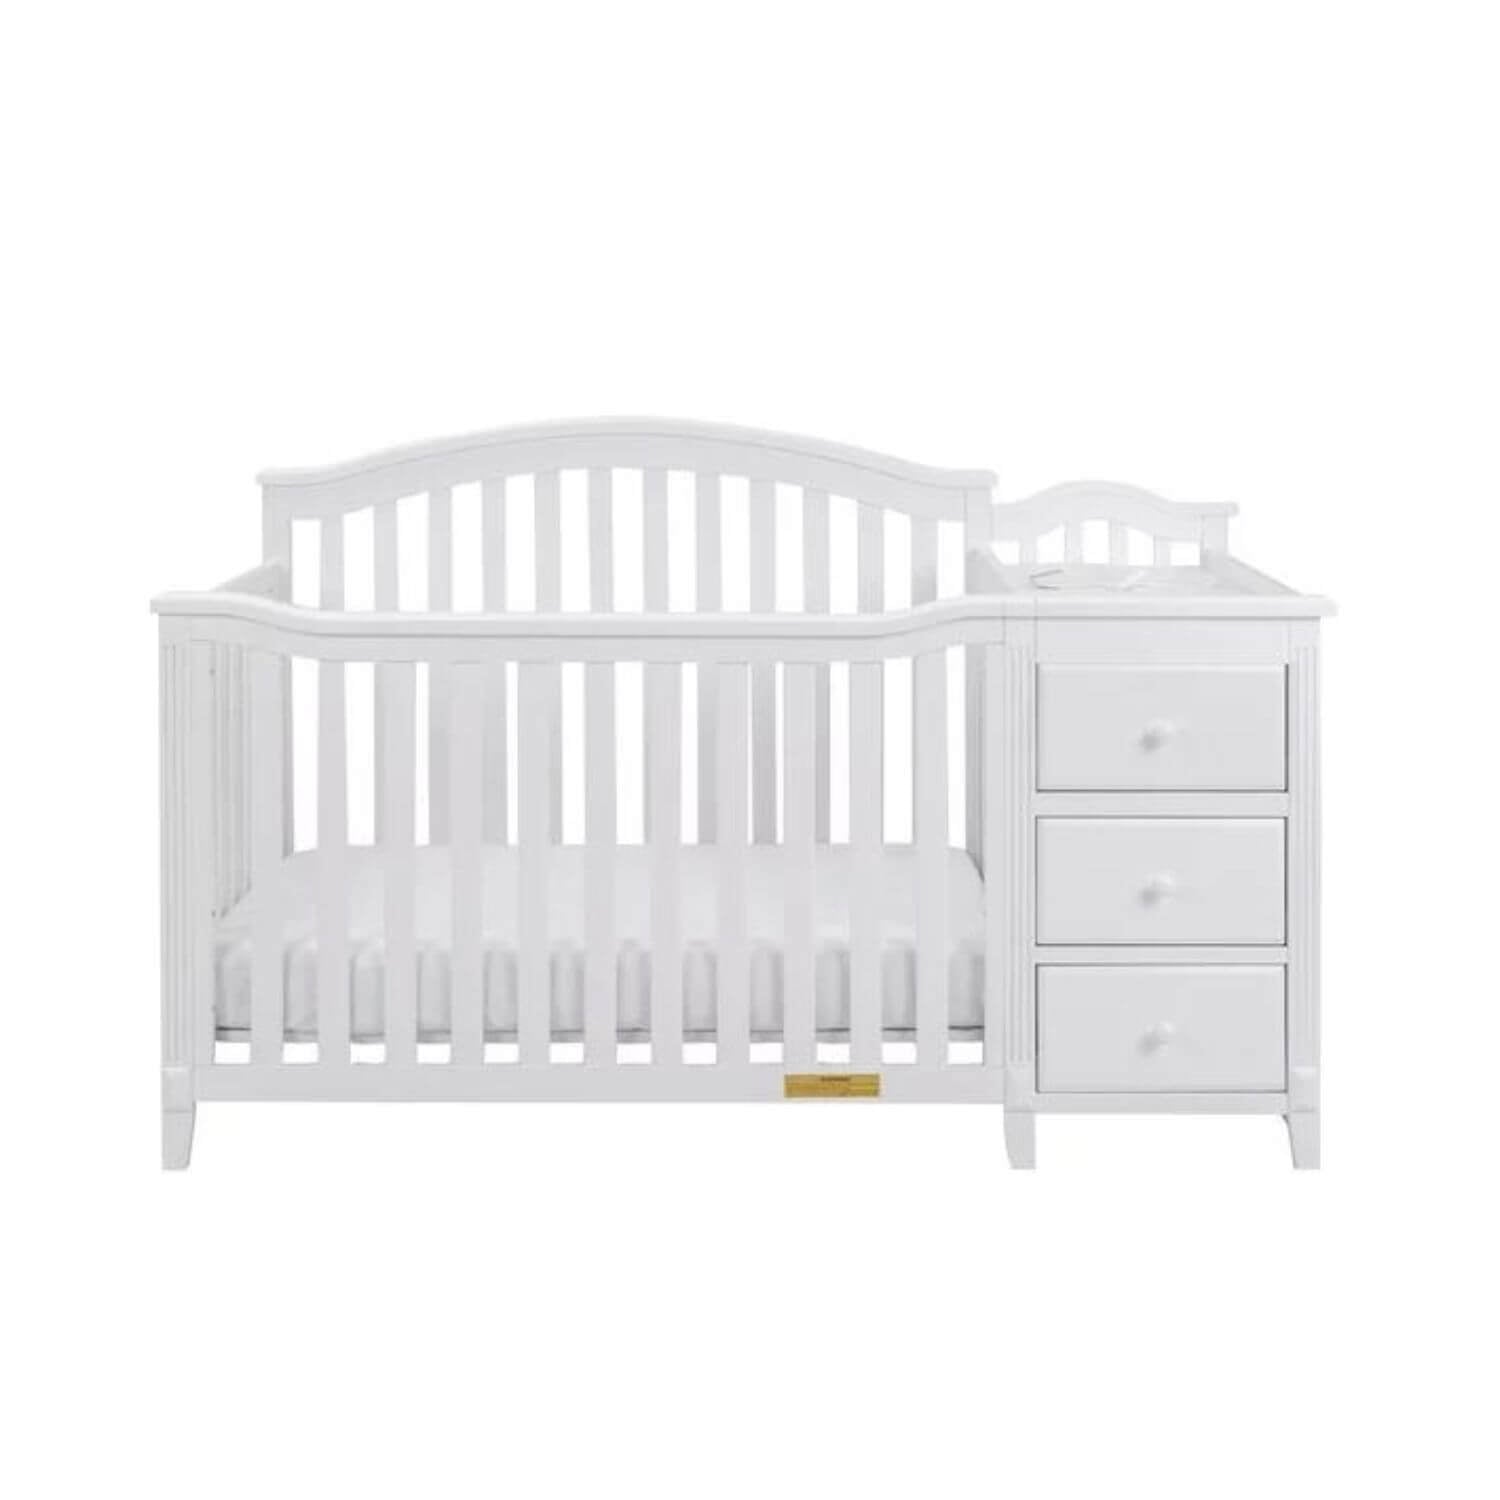 AFG Kali II 4-in-1 Convertible Crib and Changer White